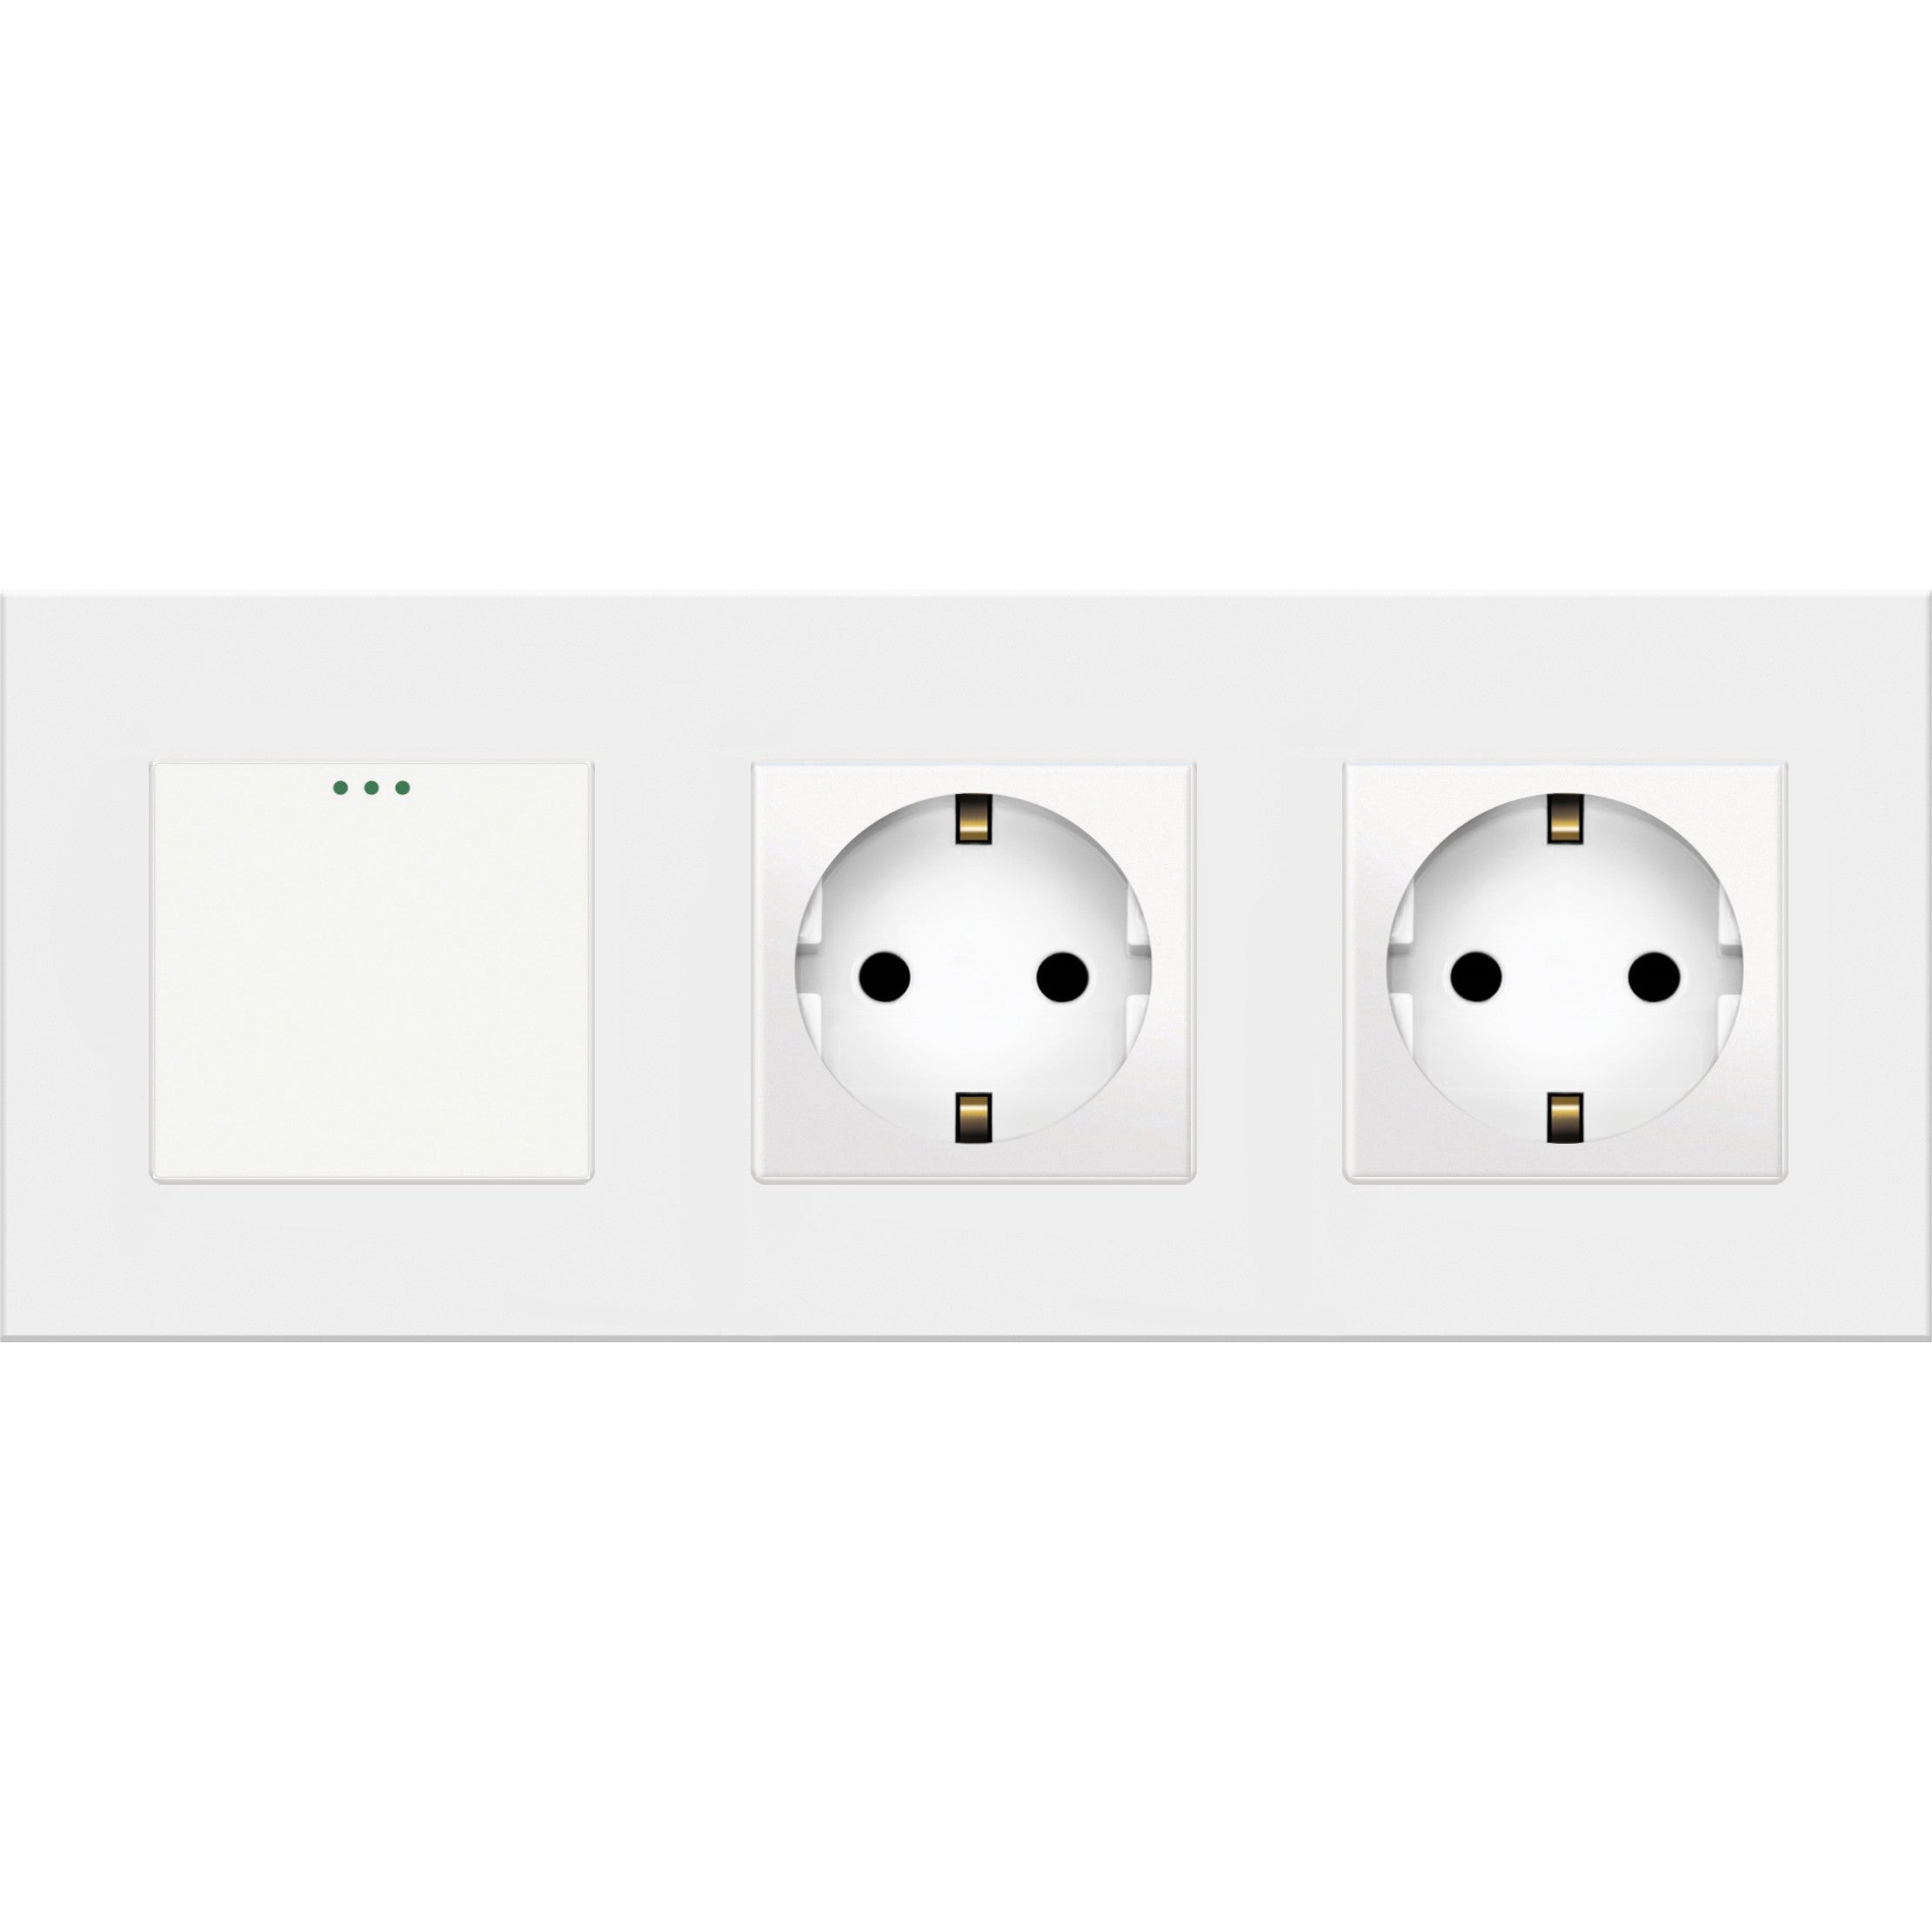 One gang mechanical switch with two socket (white, plastic)